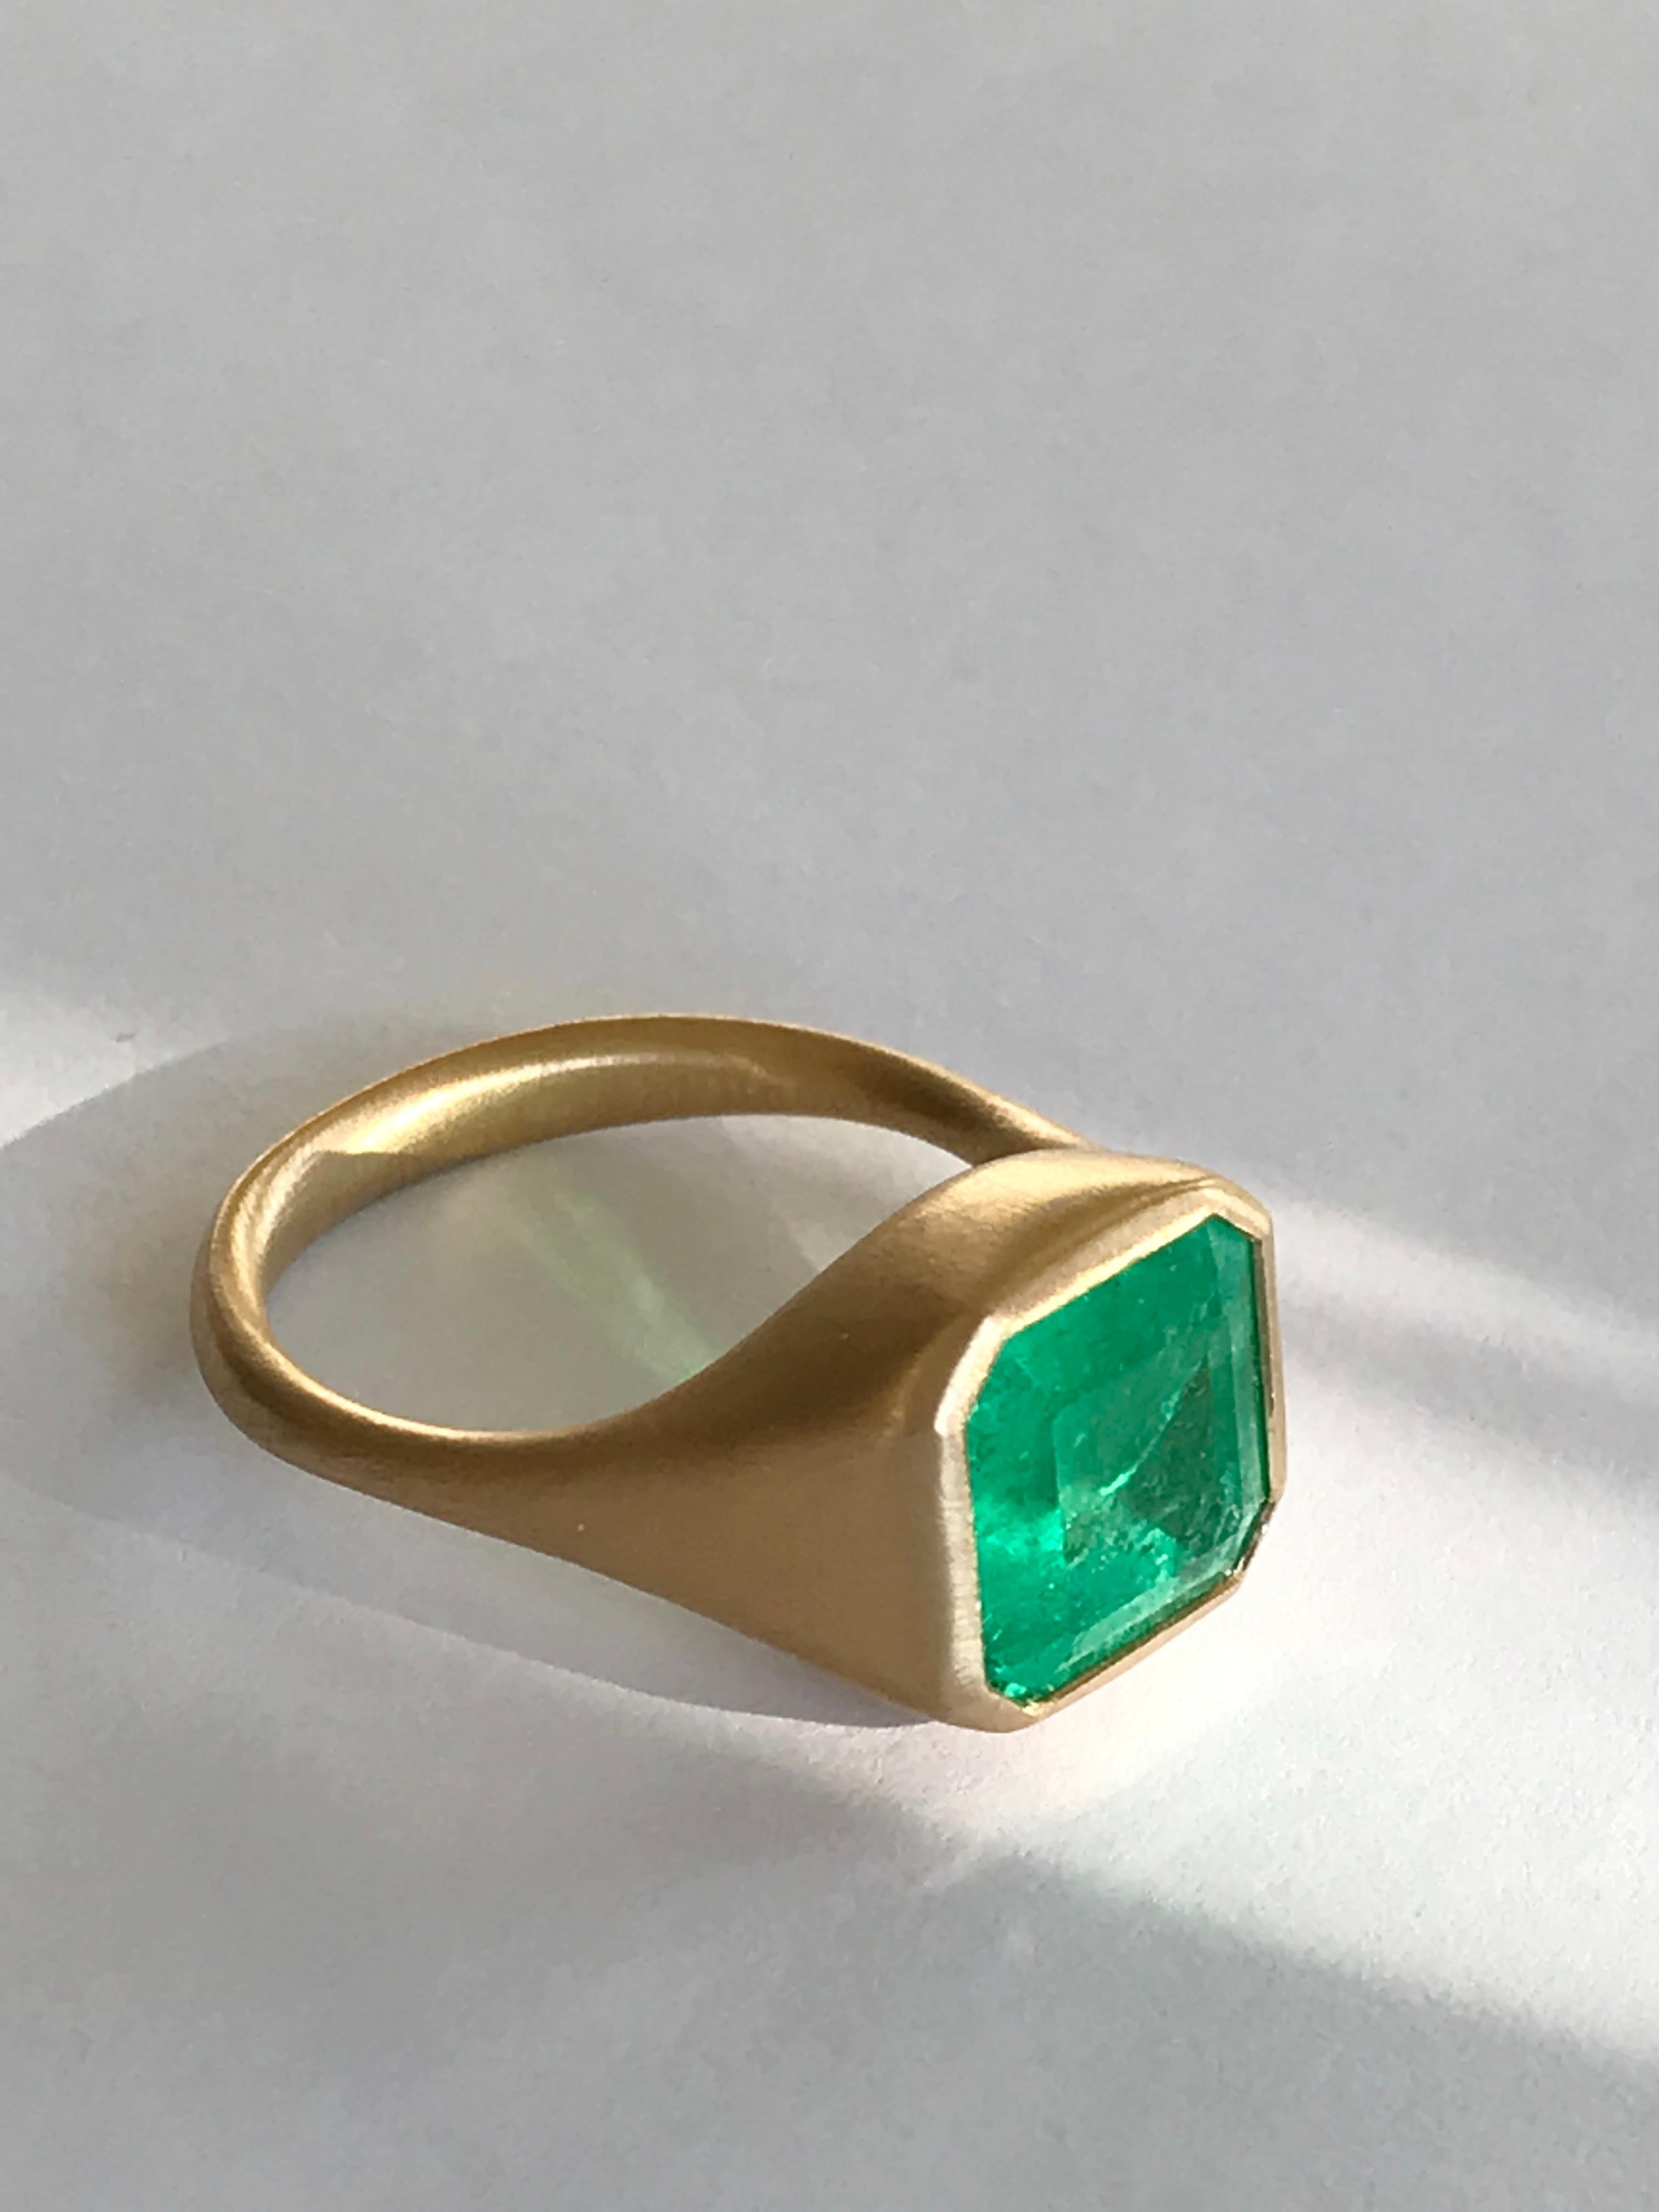 Dalben 4, 12 Carat Colombian Emerald Yellow Gold Ring For Sale 9